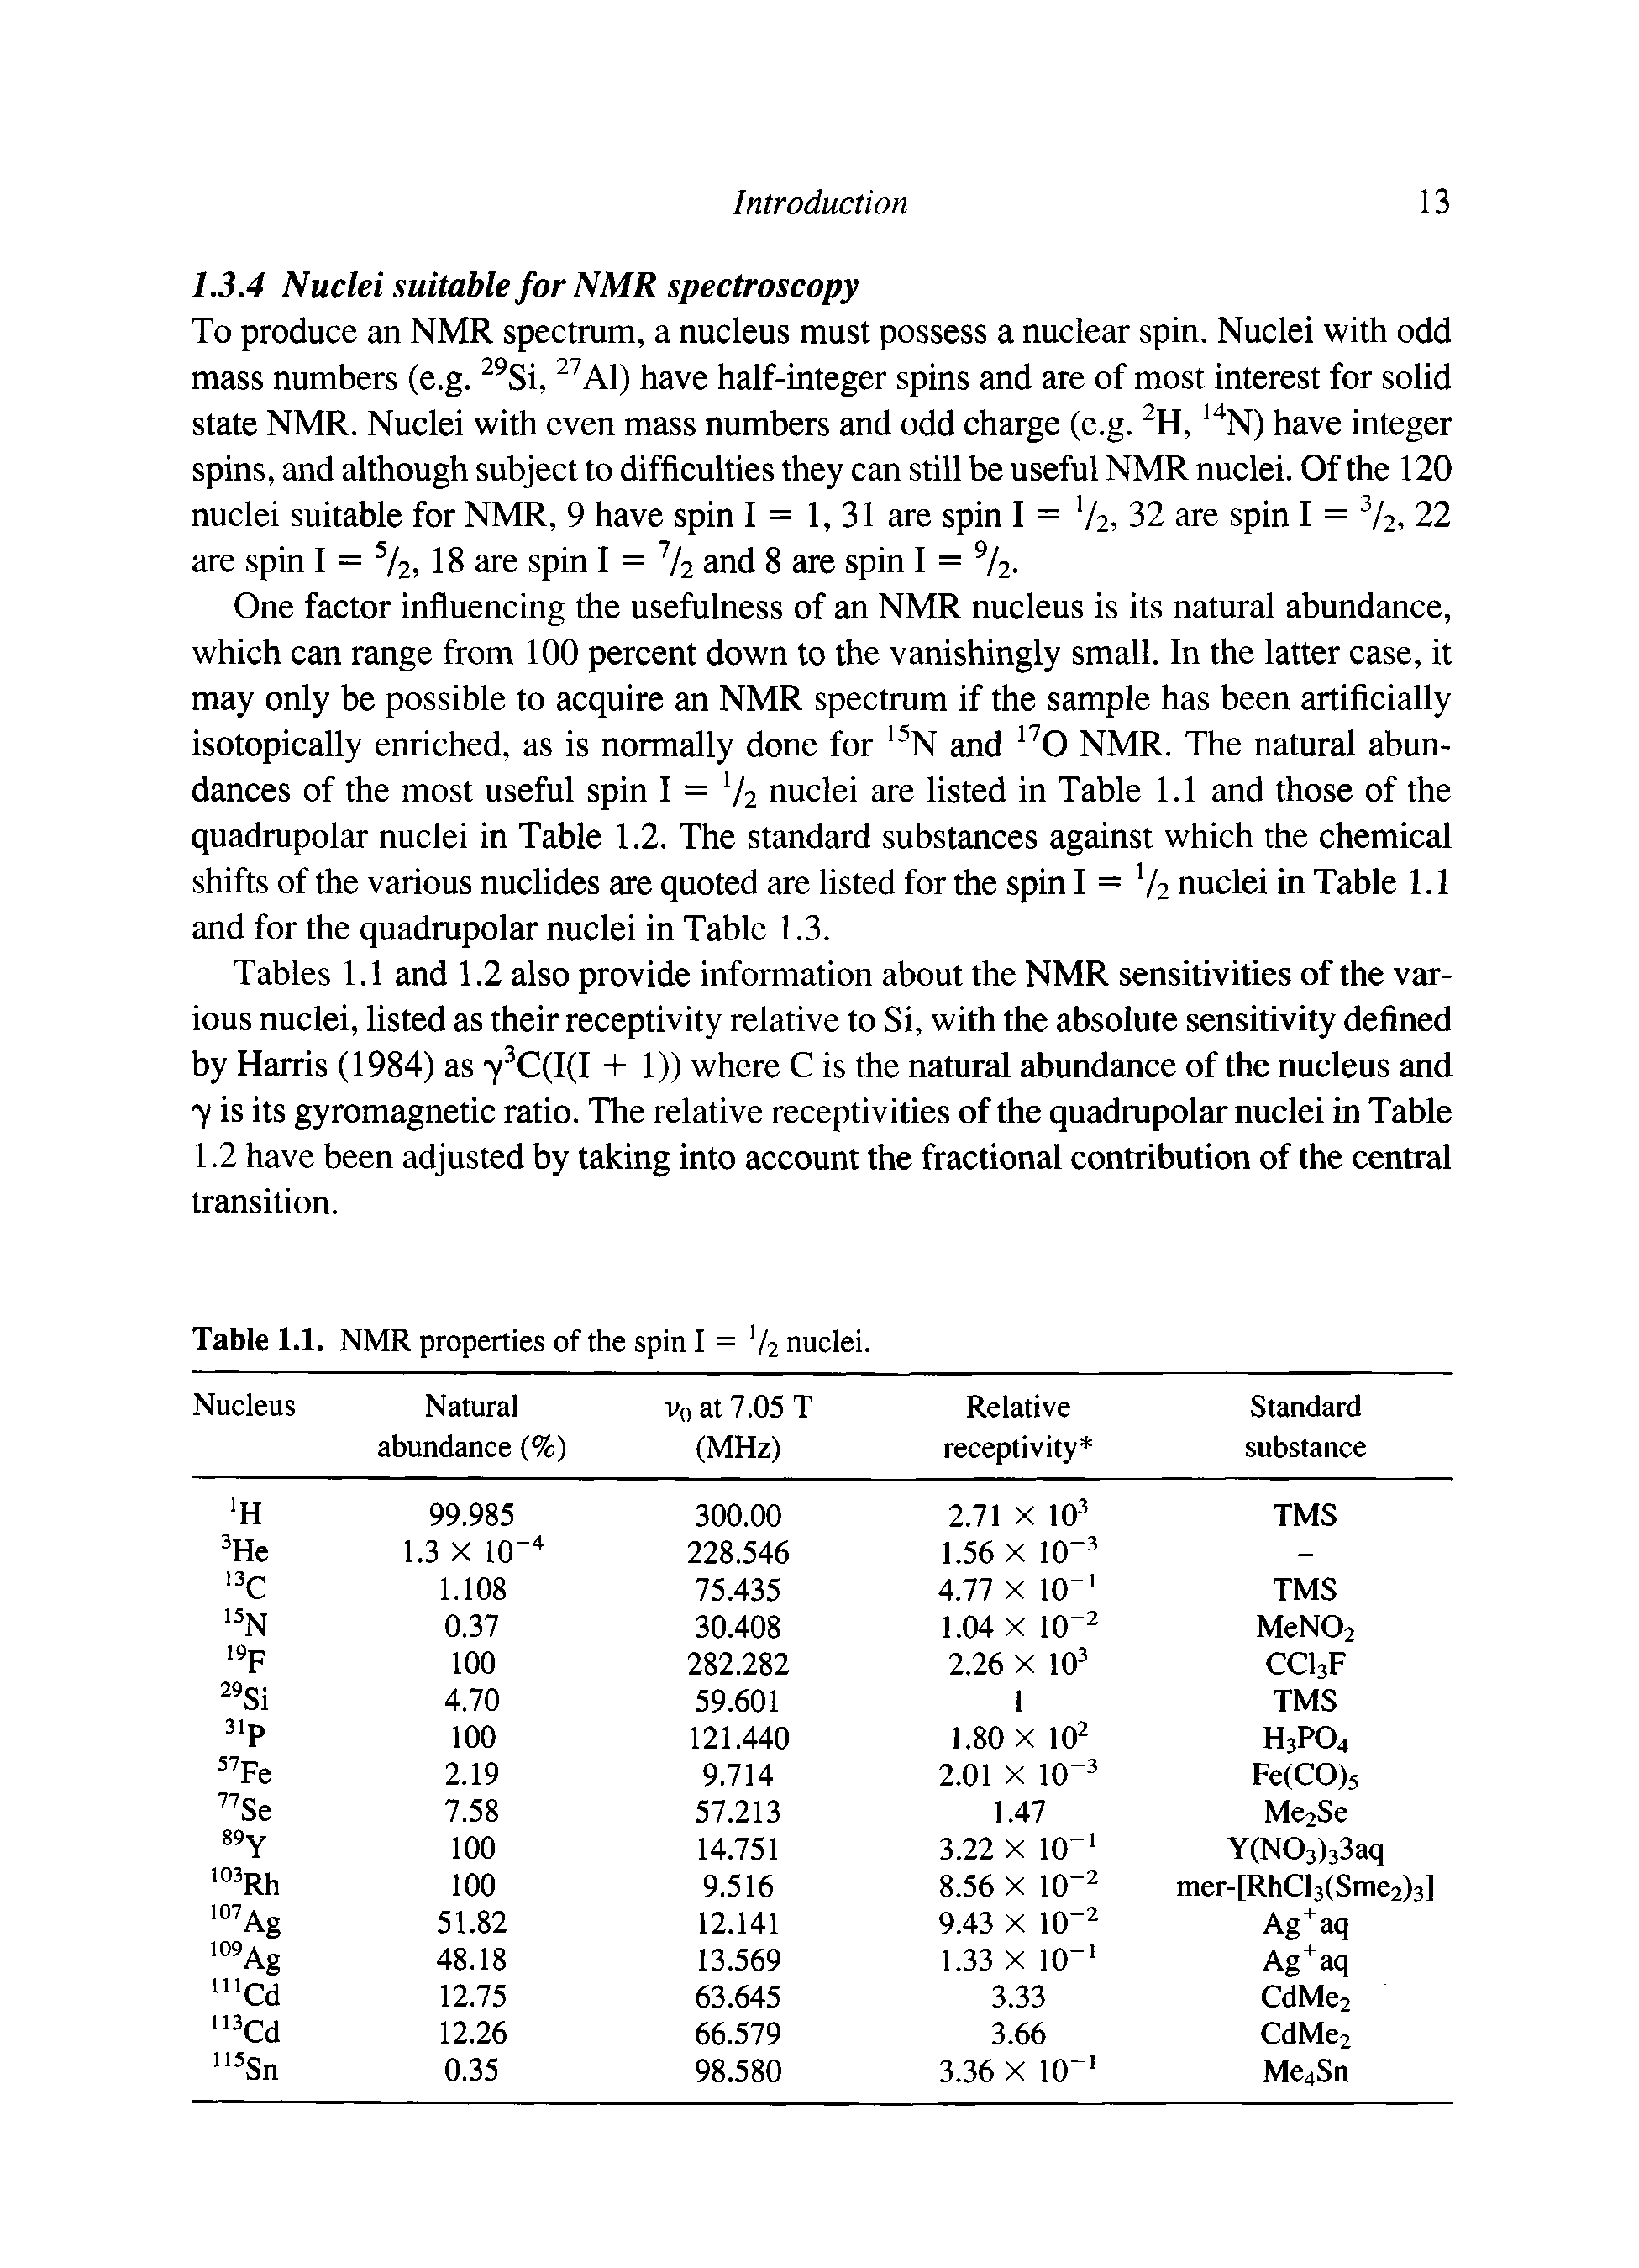 Tables 1.1 and 1.2 also provide information about the NMR sensitivities of the various nuclei, listed as their receptivity relative to Si, with the absolute sensitivity defined by Harris (1984) as 7 C(I(I +1)) where C is the natural abundance of the nucleus and y is its gyromagnetic ratio. The relative receptivities of the quadmpolar nuclei in Table 1.2 have been adjusted by taking into account the fractional contribution of the central transition.